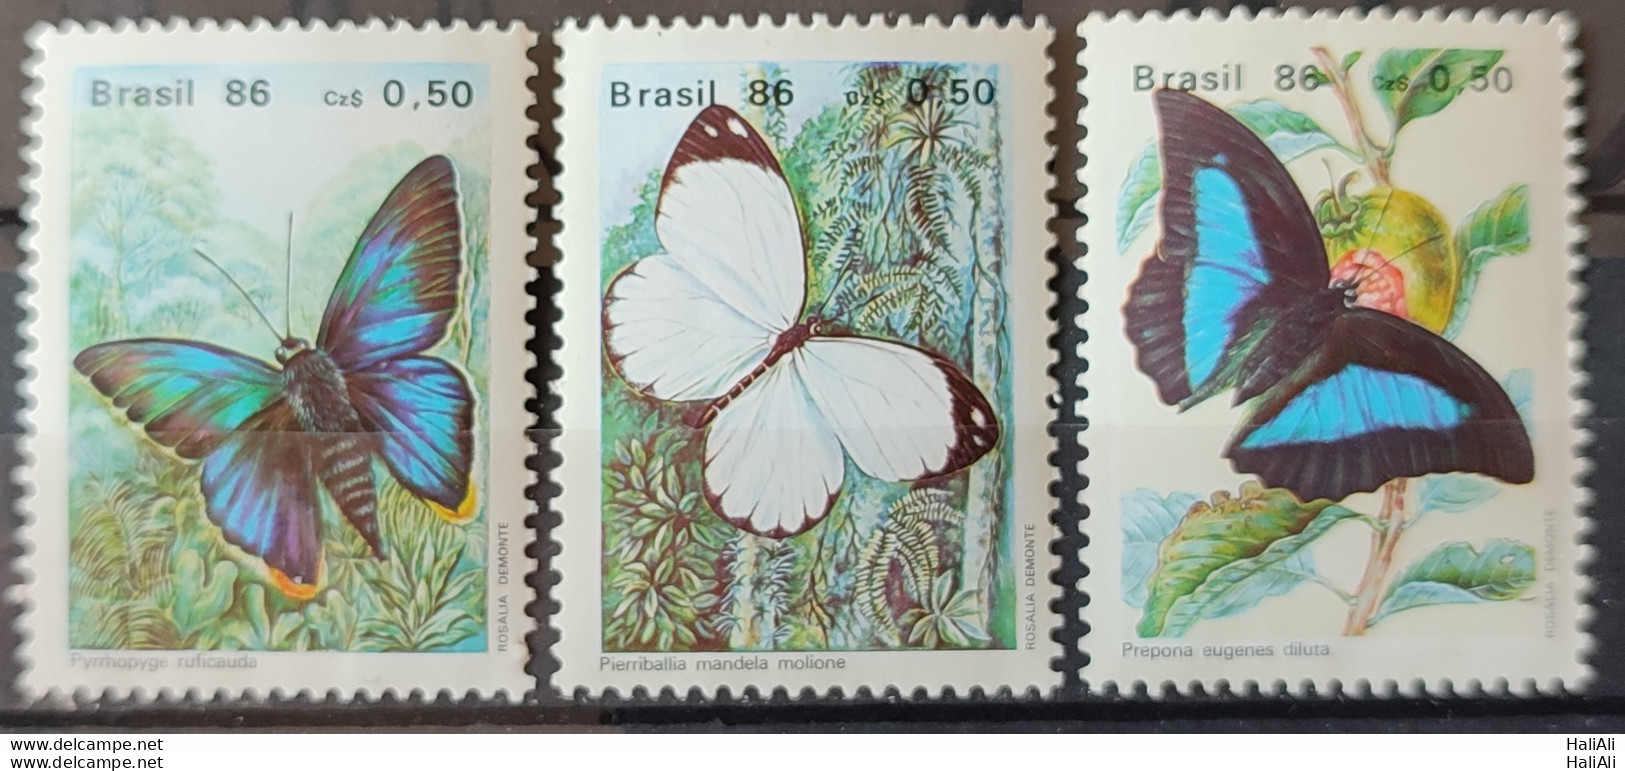 C 1512 Brazil Stamp Butterfly Insects 1986 Complete Series 2.jpg - Nuovi